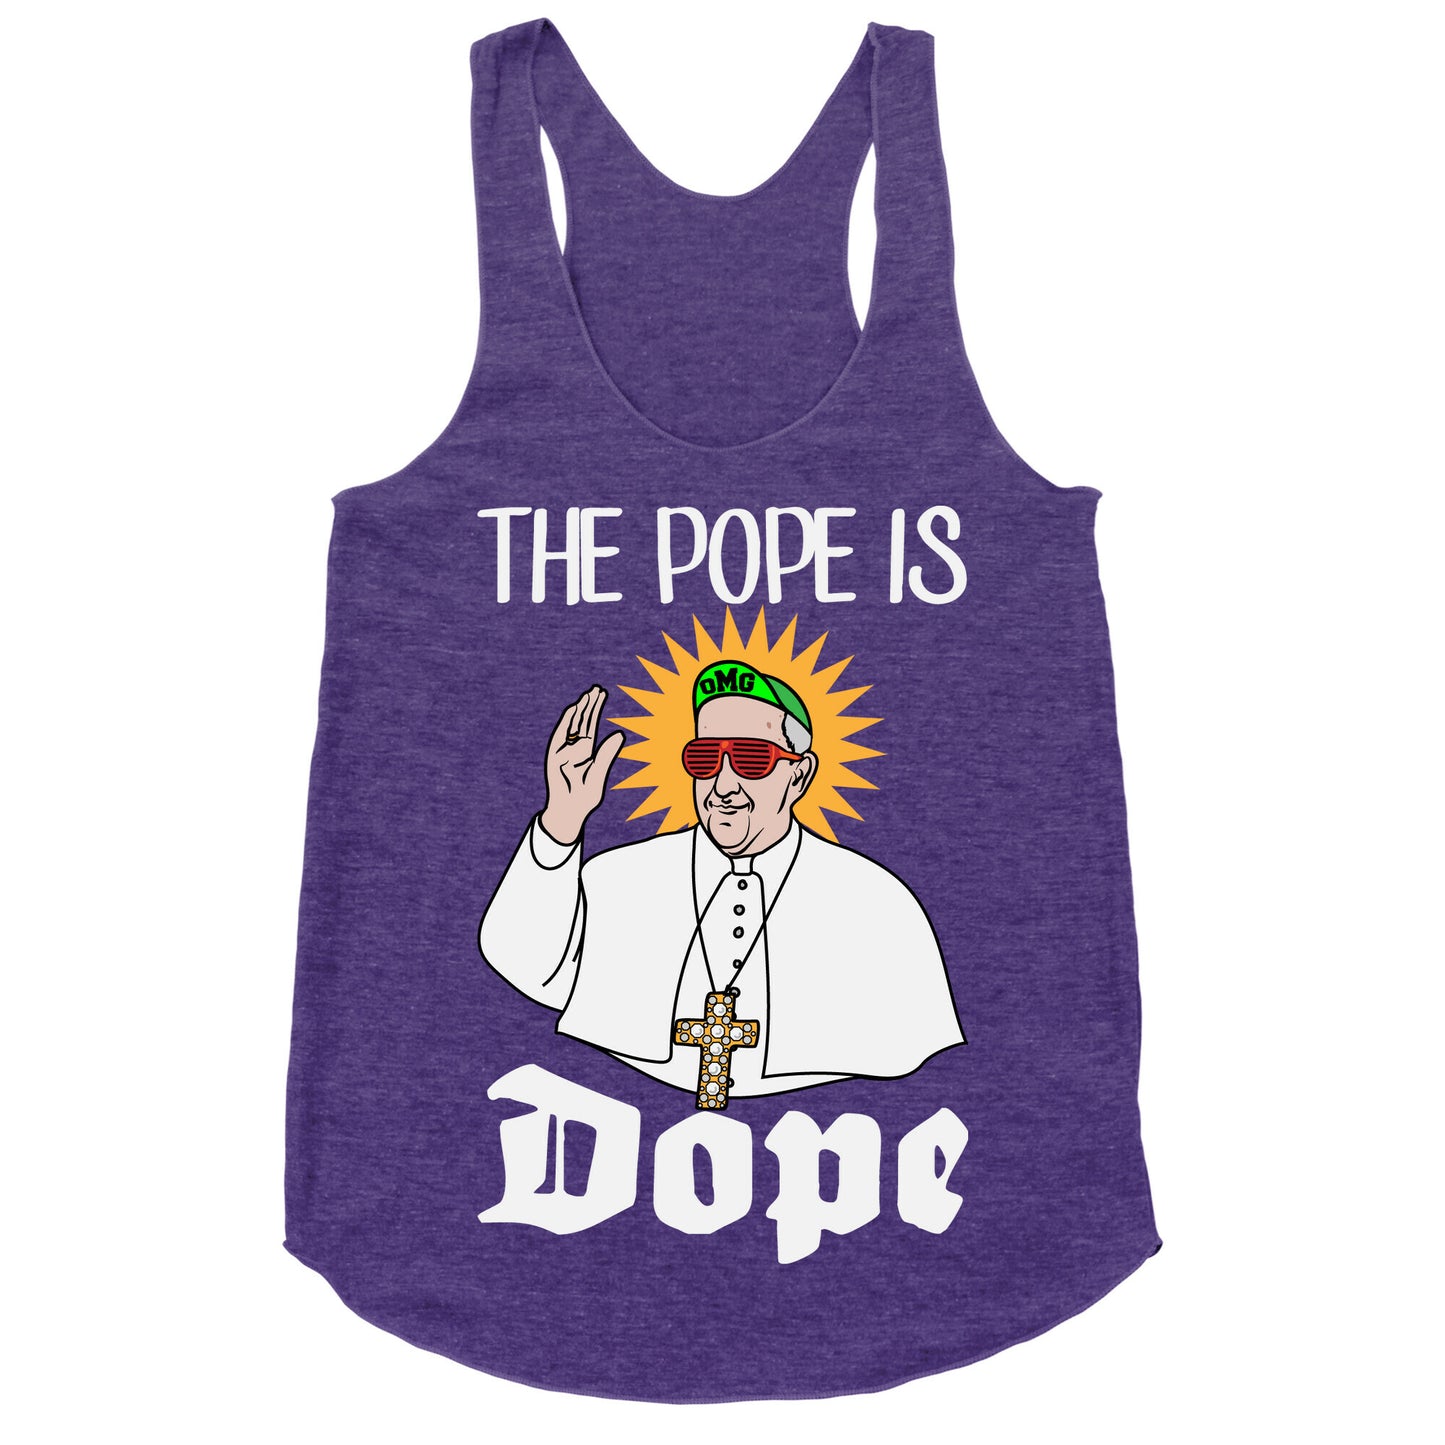 The Pope is Dope Racerback Tank